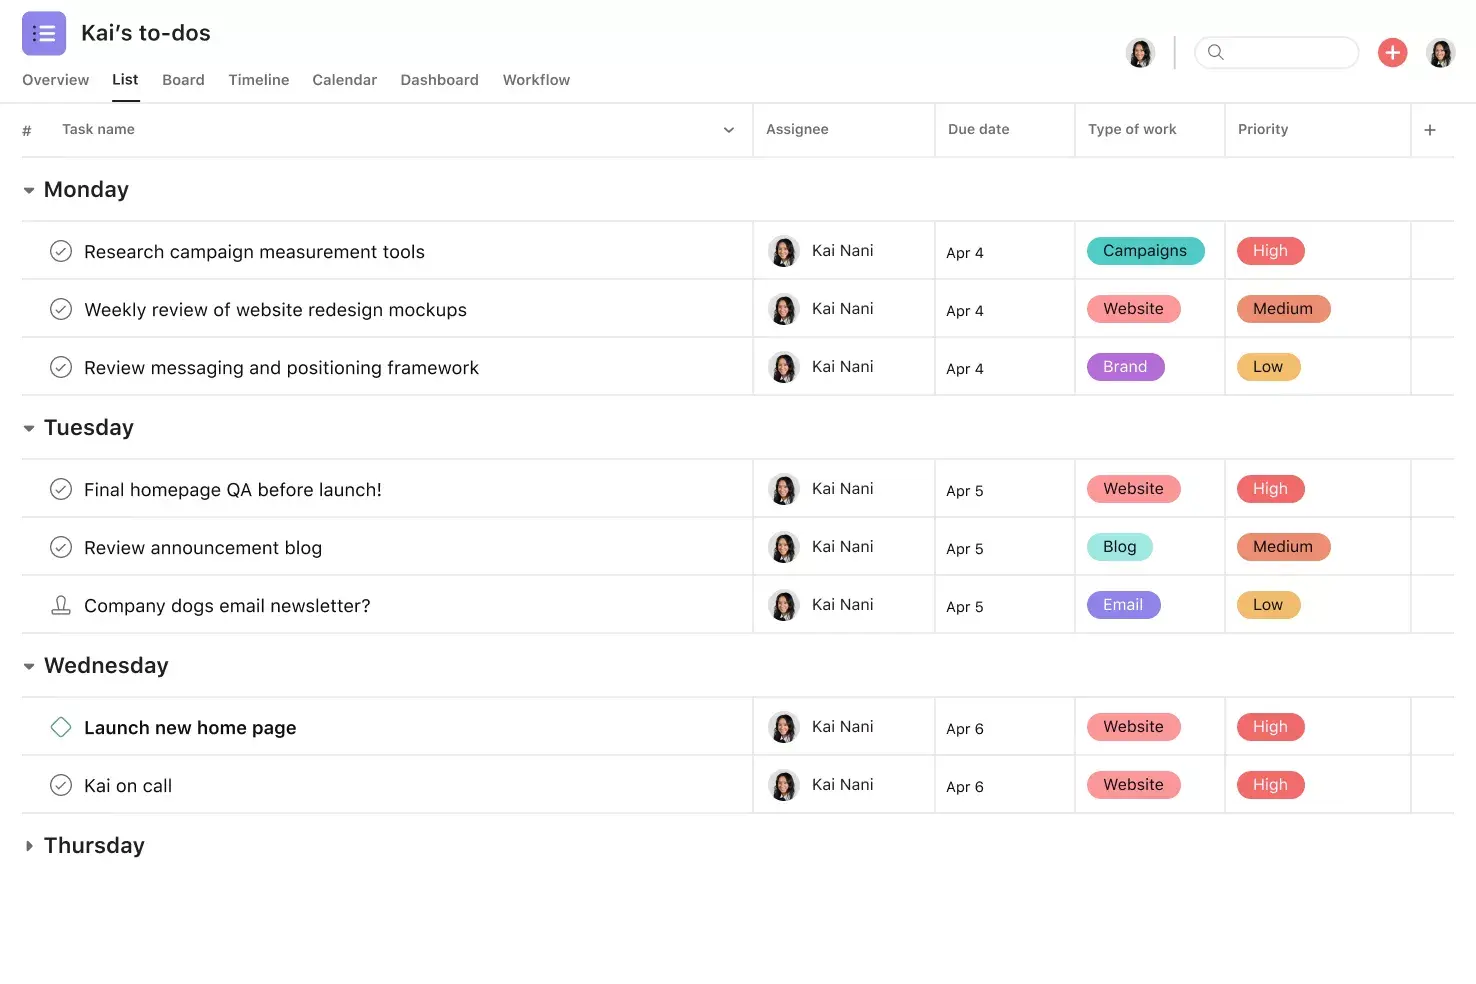 [Product ui] Weekly to-do list project in Asana, spreadsheet-style project view (List)